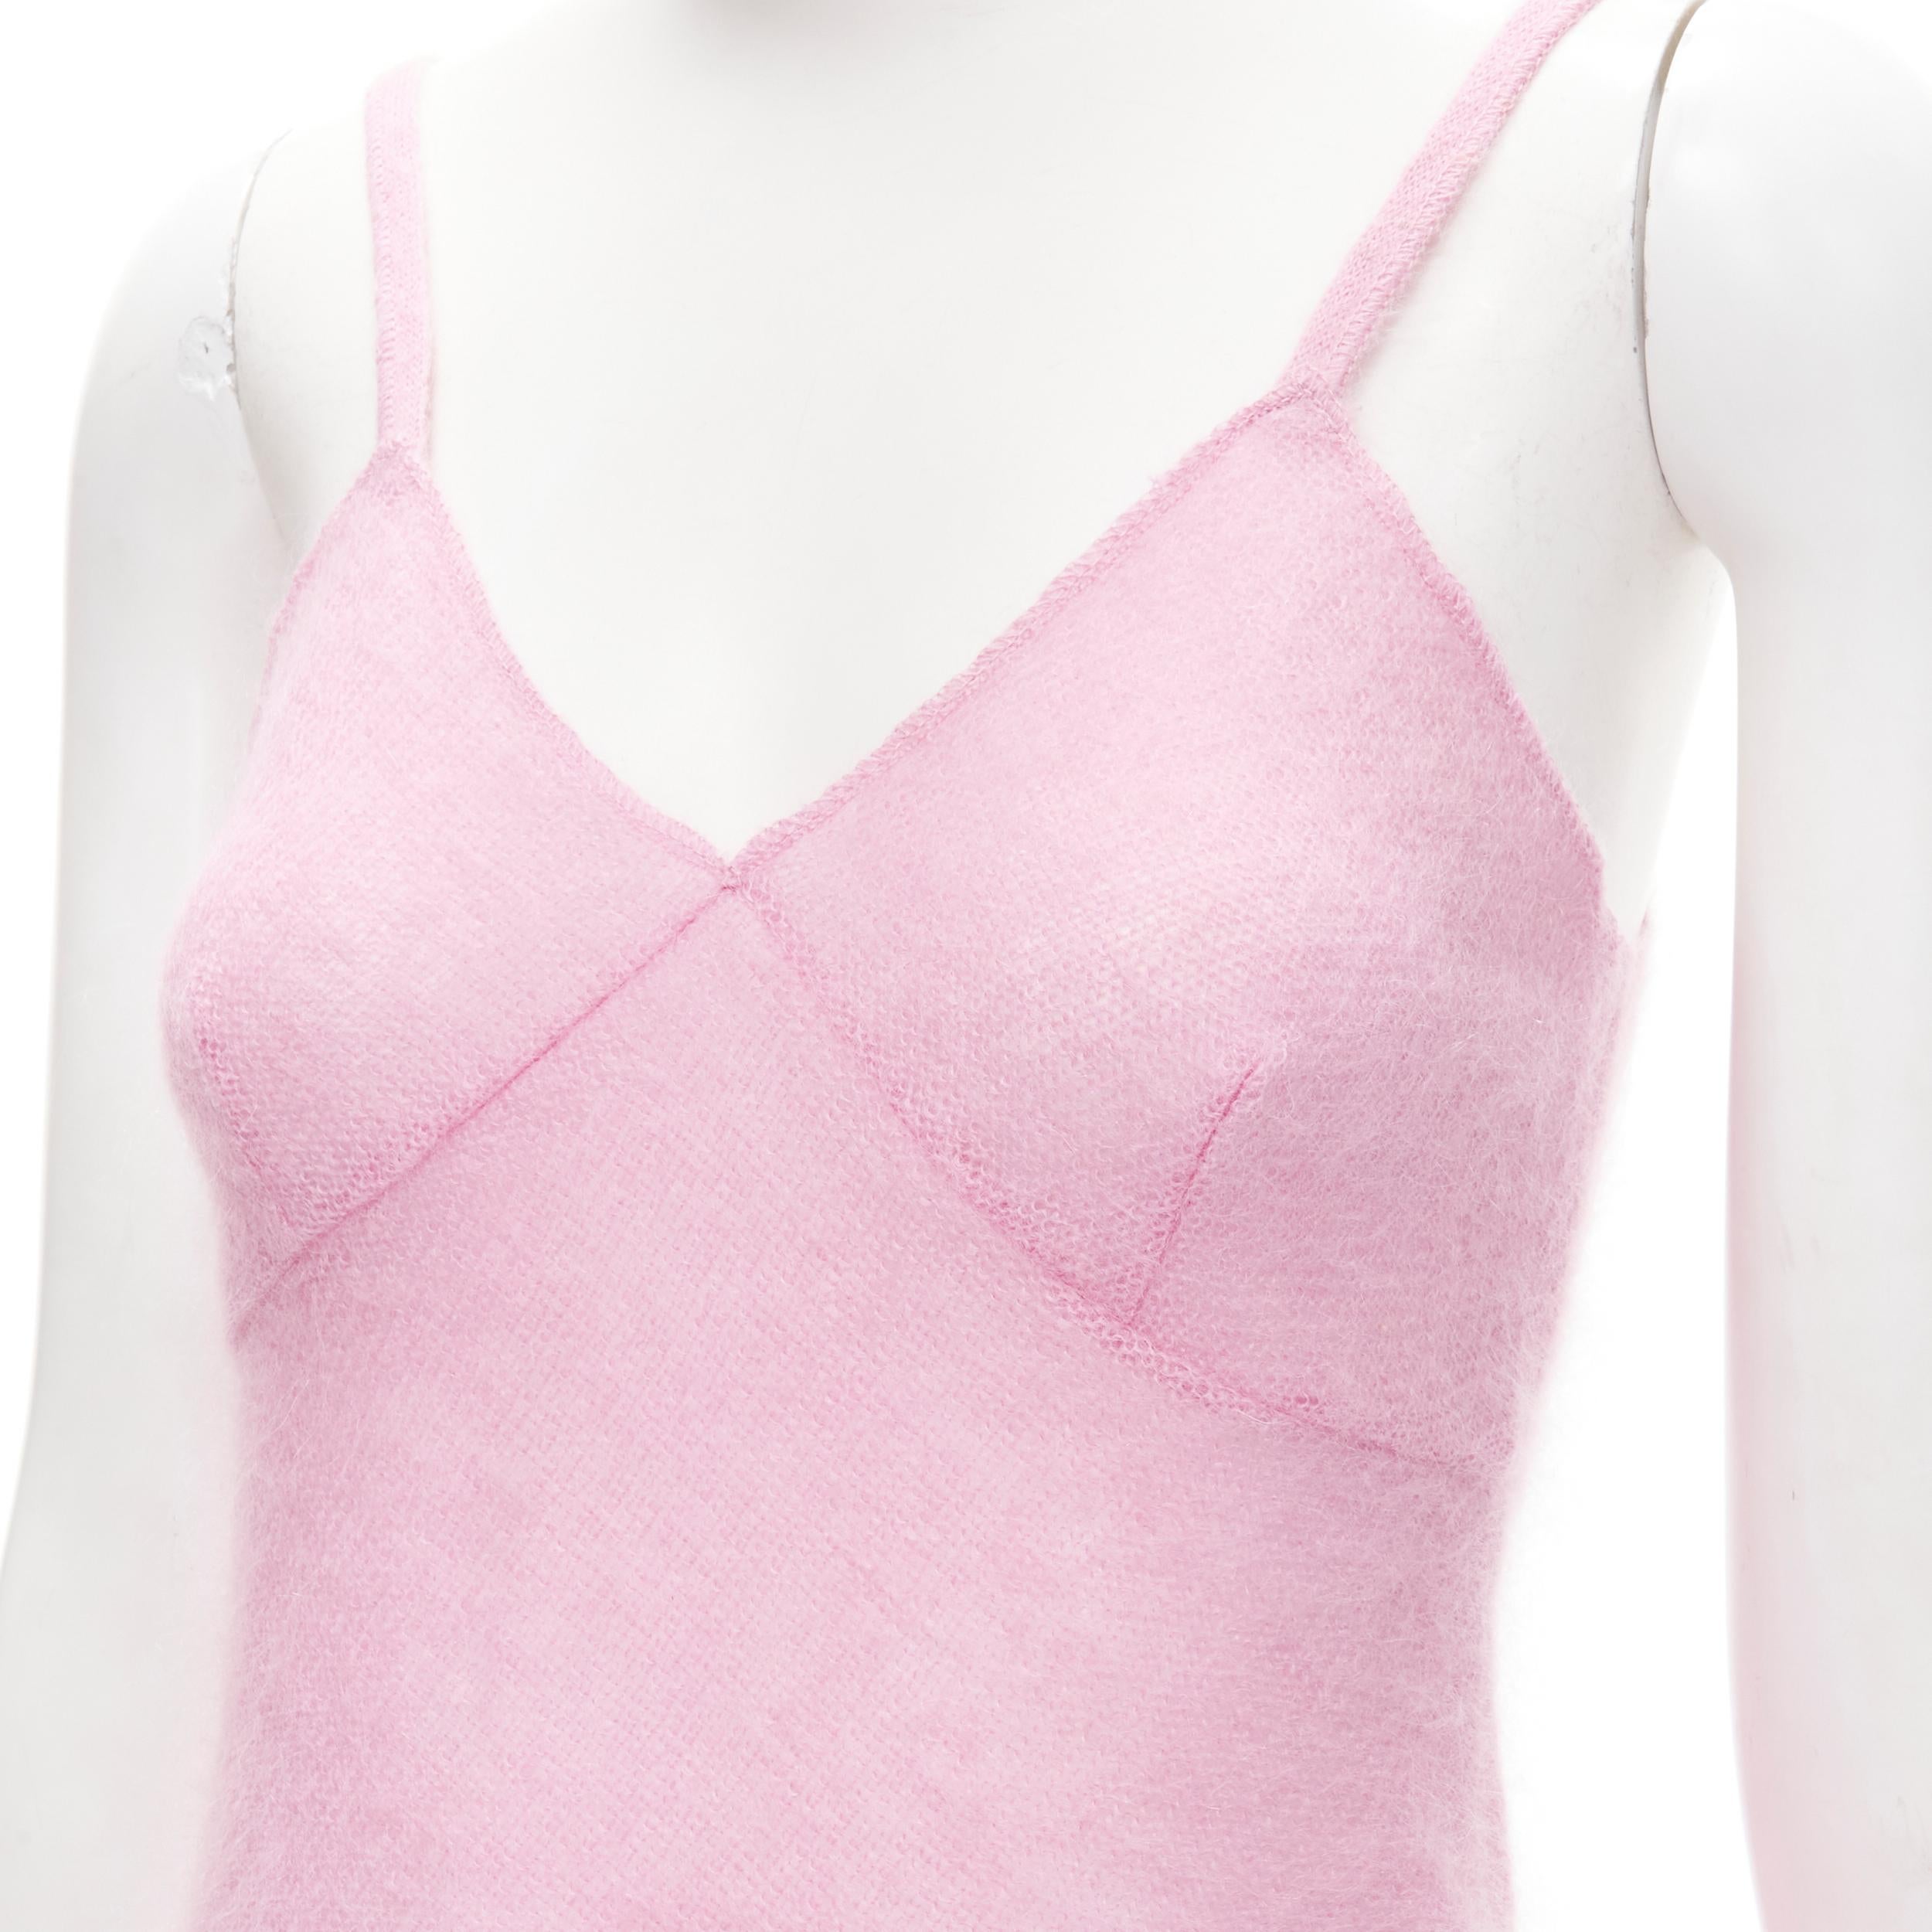 MIU MIU Vintage Y2K pink fine wool knit minimal camisole IT38 XS 
Reference: ANWU/A00723 
Brand: Miu Miu 
Material: Feels like cool 
Color: Pink 
Pattern: Solid 
Extra Detail: Fine knit wool. Bust dart. 
Made in: Italy 

CONDITION: 
Condition: